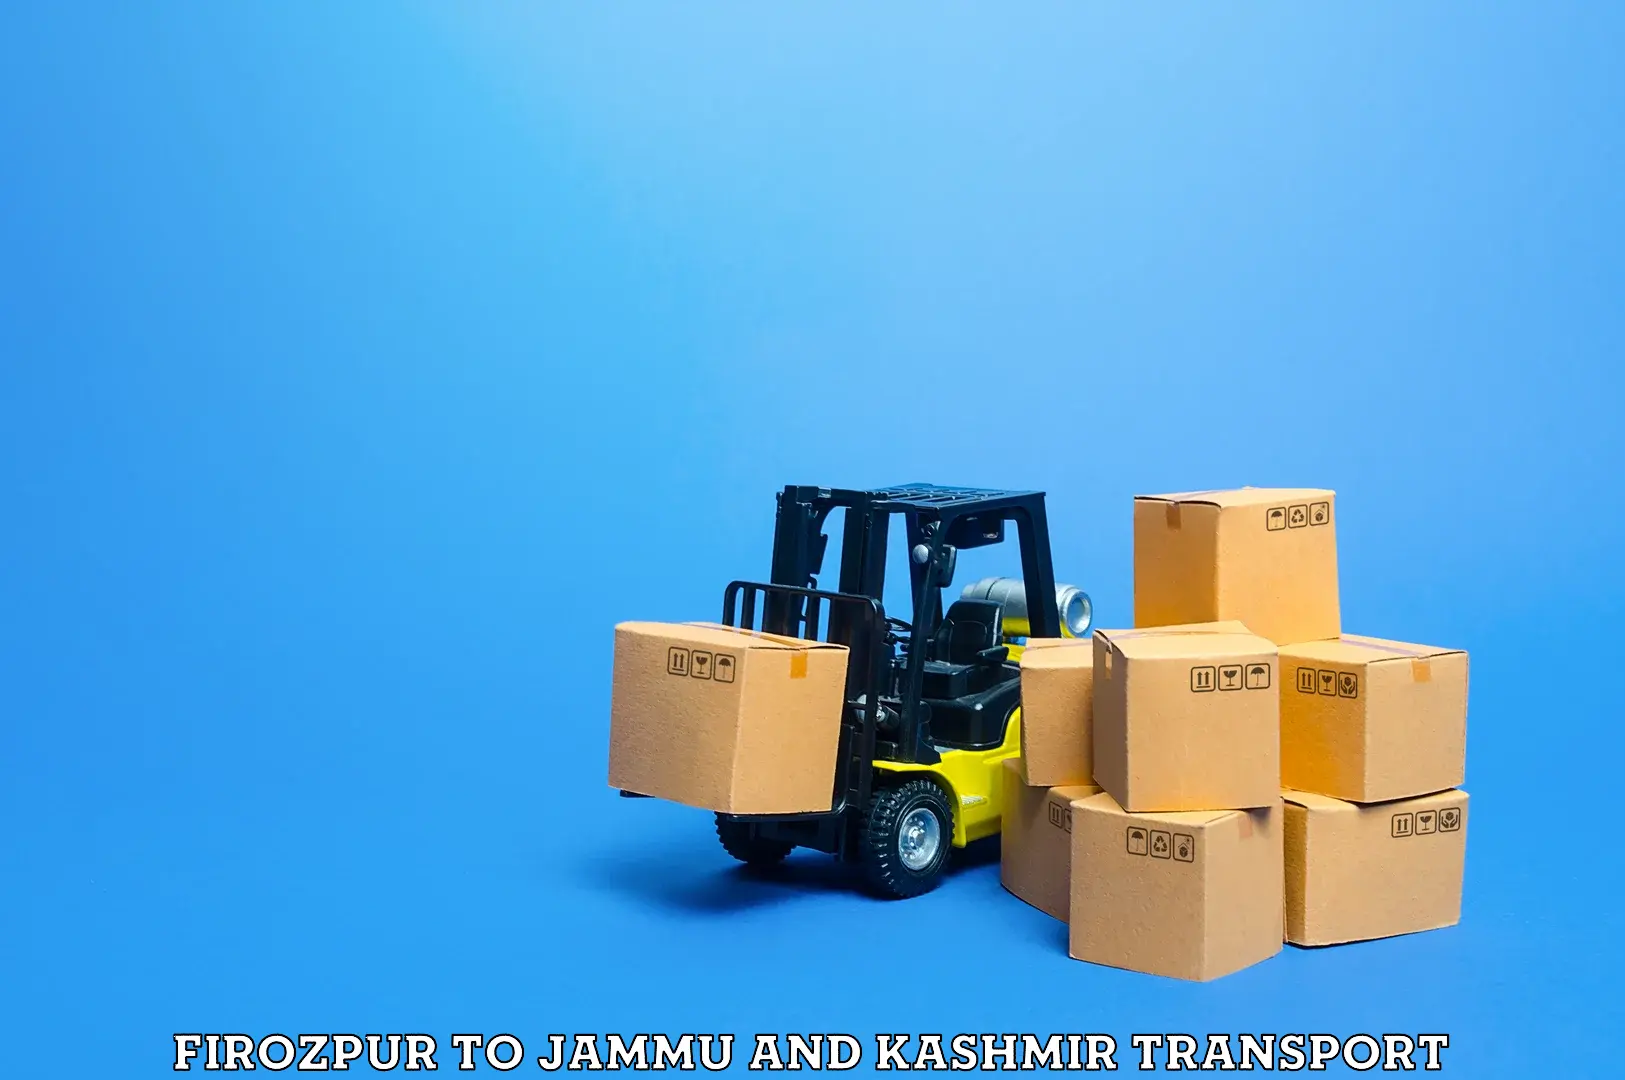 Vehicle transport services Firozpur to University of Jammu